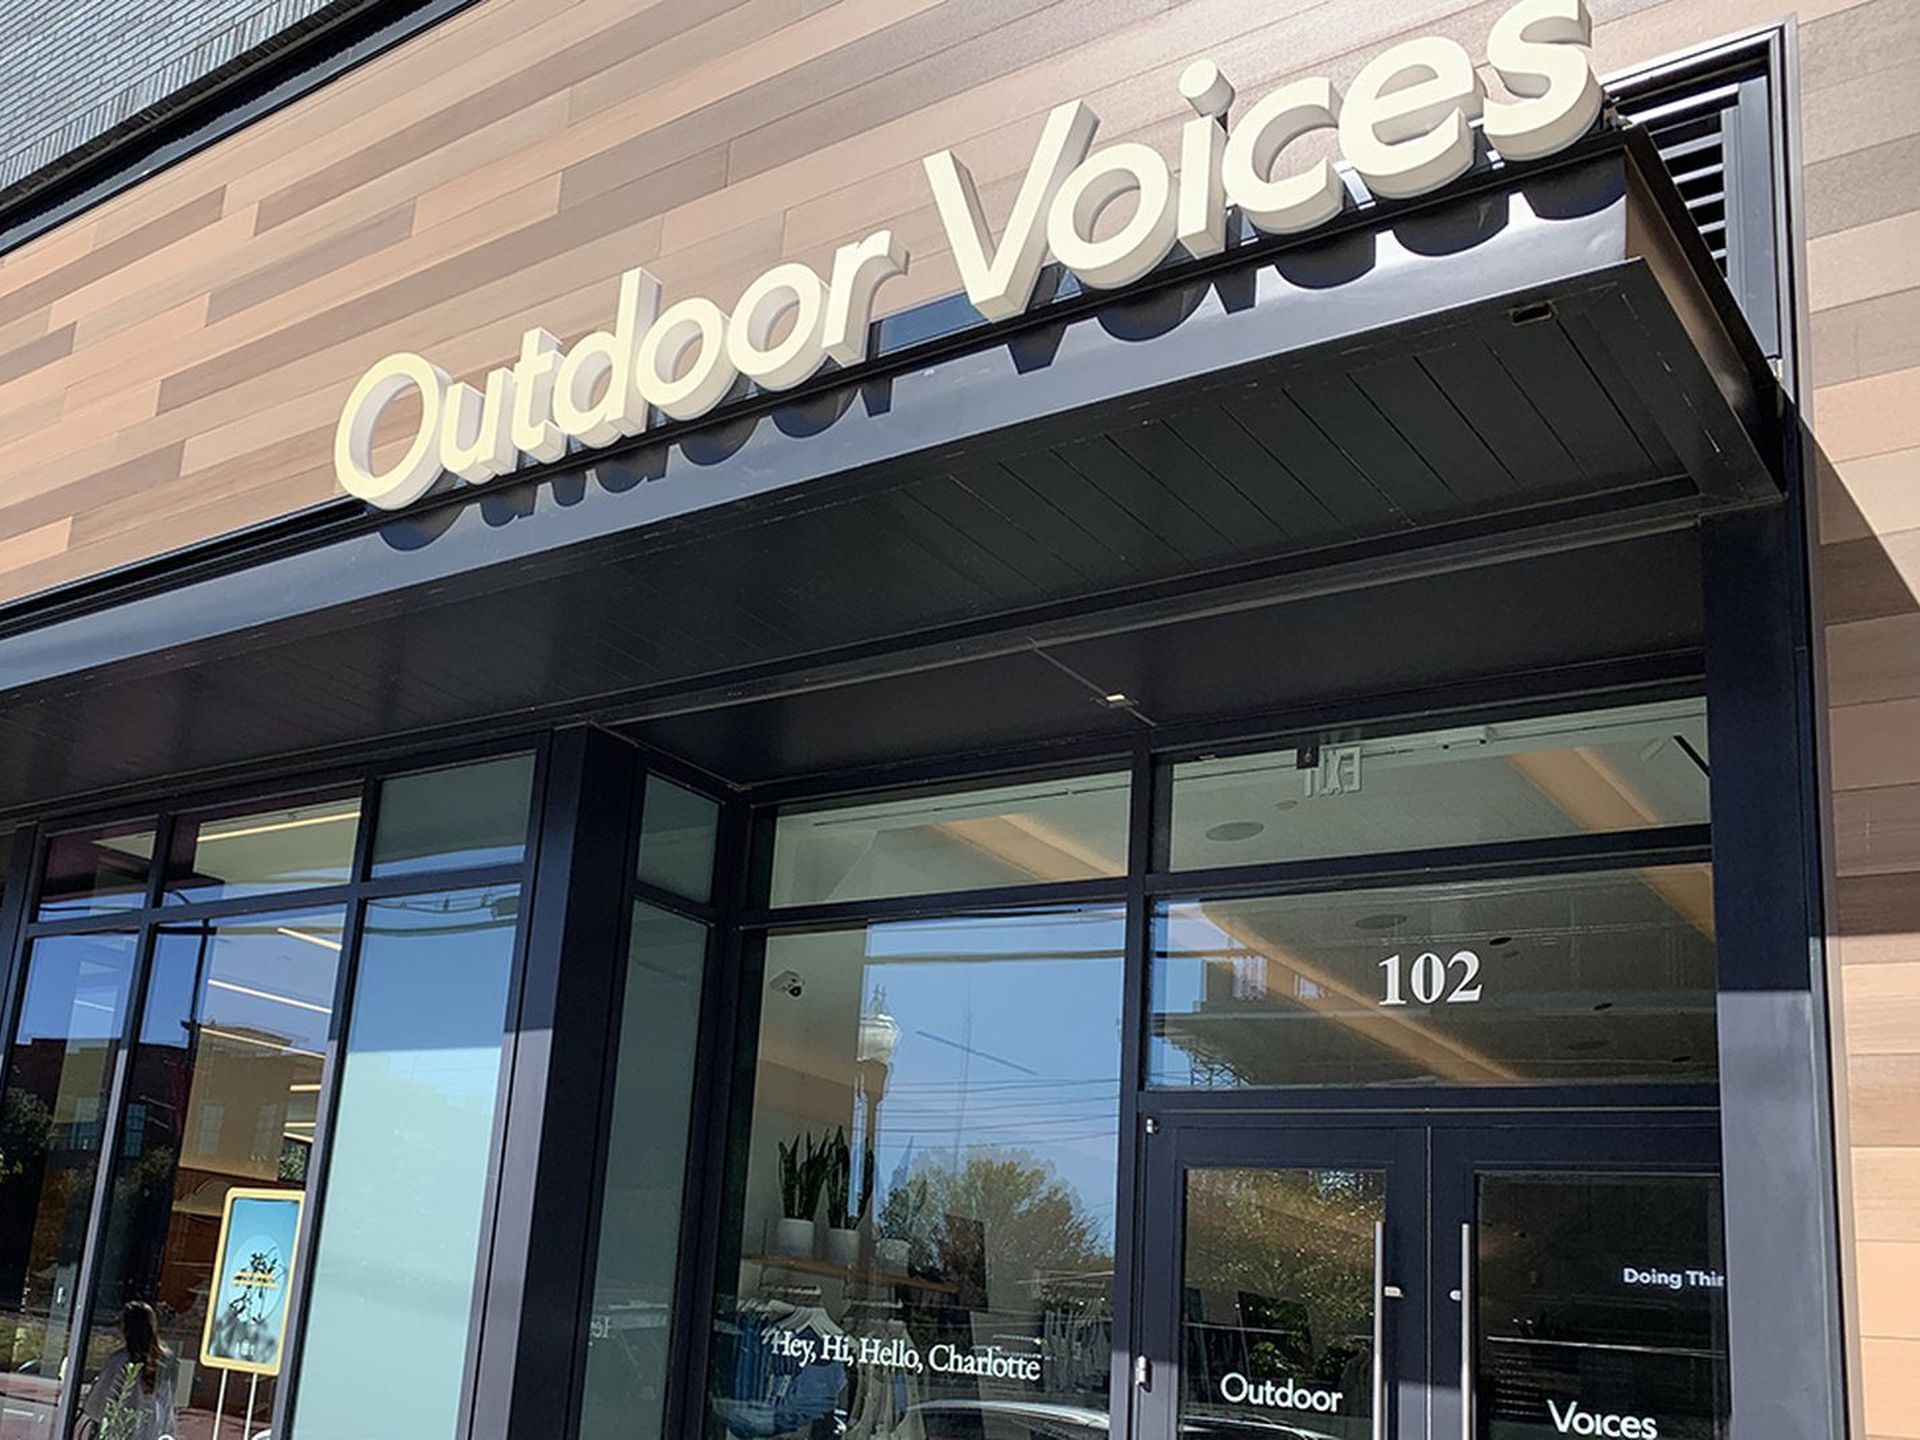 Outdoor Voices to close all retail stores, employees say - Axios